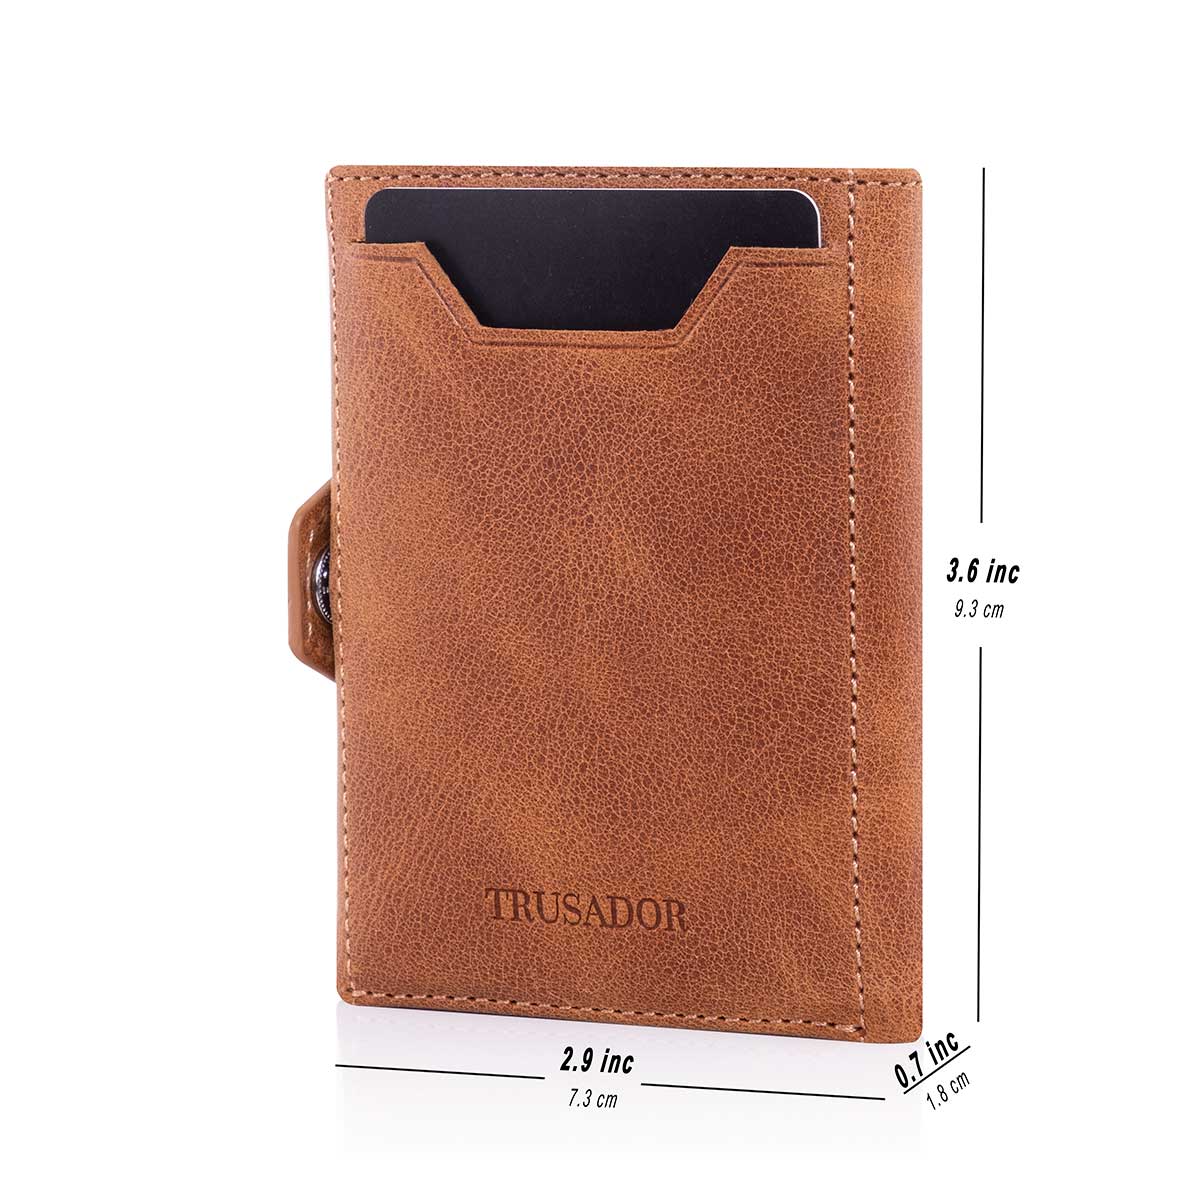 Trusador Verona Air Handmade Men & Women Full Grain Leather, Air Tag Wallets, Best Gift, AirTag Wallet, Card ID, Gift for Him or Her